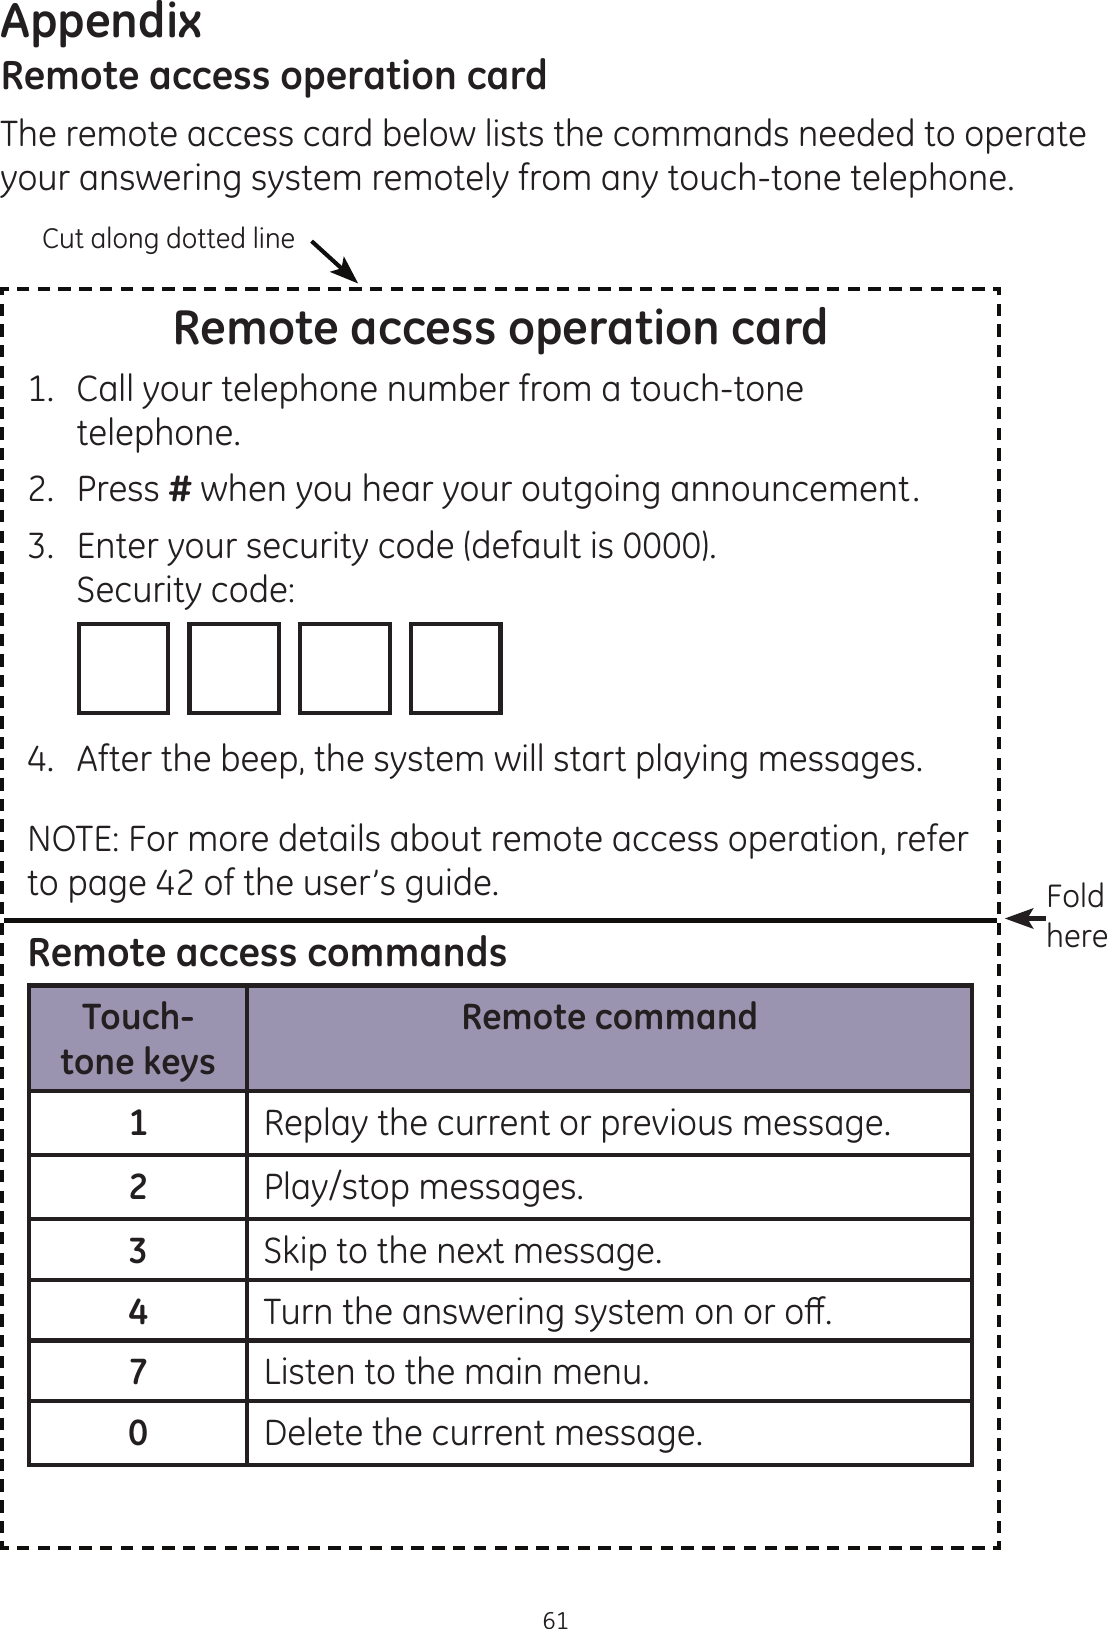 Appendix61Remote access operation cardThe remote access card below lists the commands needed to operate your answering system remotely from any touch-tone telephone. Remote access operation card1.   Call your telephone number from a touch-tone telephone.2.   Press # when you hear your outgoing announcement.3.   Enter your security code (default is 0000).  Security code:                   4.  After the beep, the system will start playing messages.NOTE: For more details about remote access operation, refer to page 42 of the user’s guide.Remote access commandsTouch-tone keysRemote command1Replay the current or previous message.2Play/stop messages.3Skip to the next message.47XUQWKHDQVZHULQJV\VWHPRQRURȺ7Listen to the main menu.0Delete the current message.Cut along dotted lineFold here